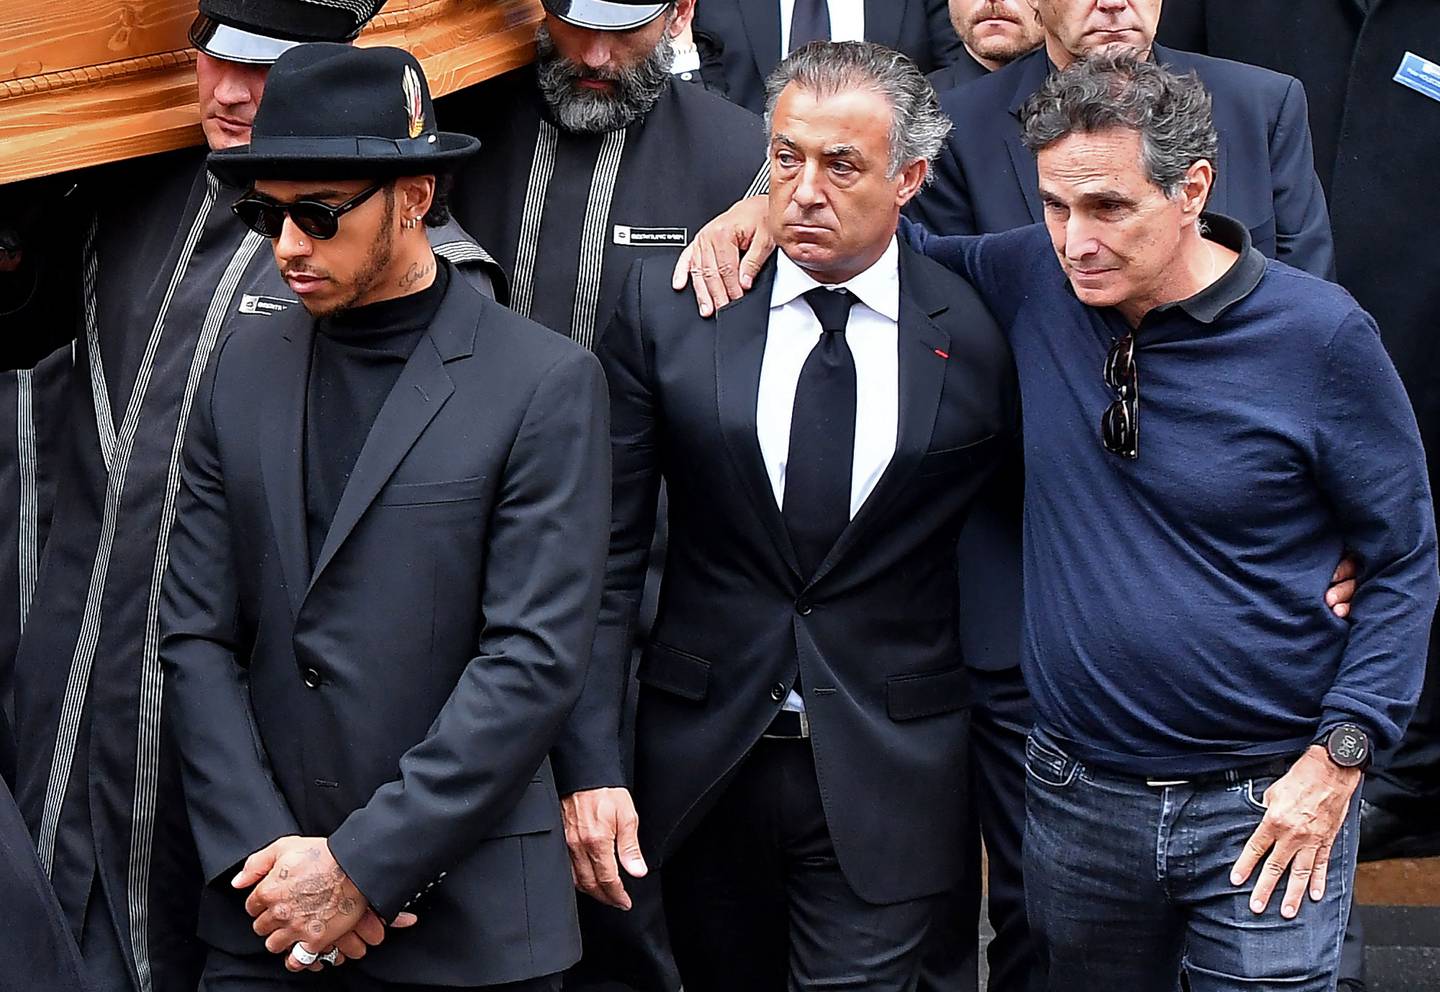 (FILES) In this file photo taken on May 29, 2019, former Formula One drivers Nelson Piquet, right, and Jean Alesi, centre, and British Formula One champion Lewis Hamilton, left, escort the coffin of late Austrian three-time Formula One world champion Niki Lauda. AFP